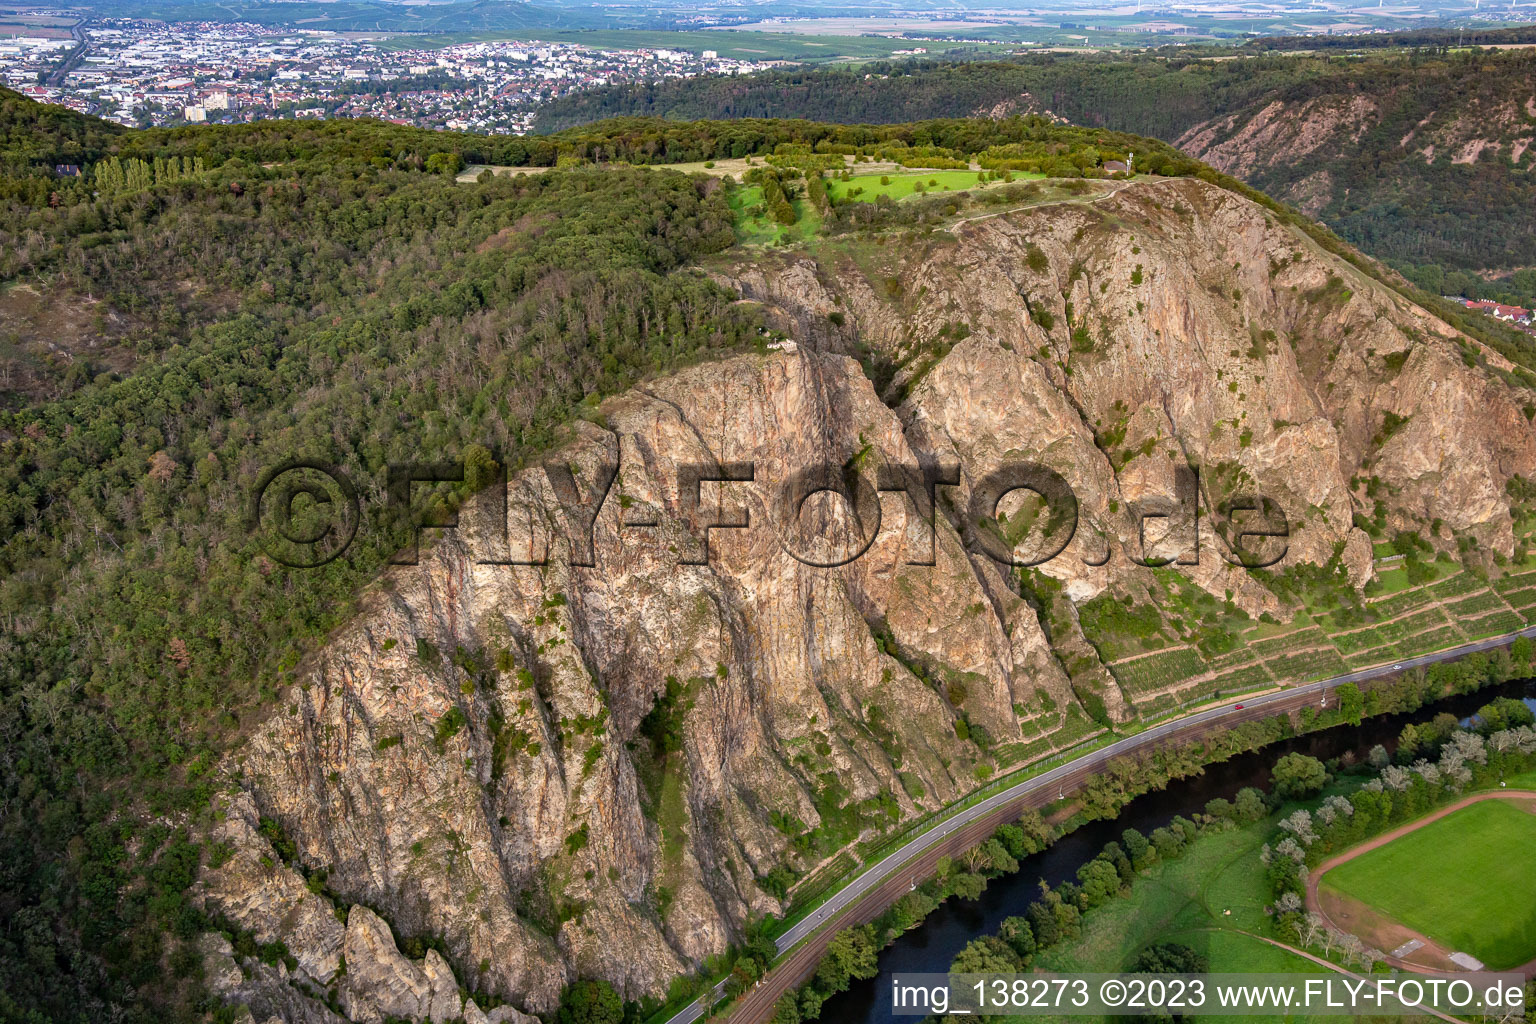 The Rotenfels is the highest steep face between Norway and the Alps in Traisen in the state Rhineland-Palatinate, Germany from above